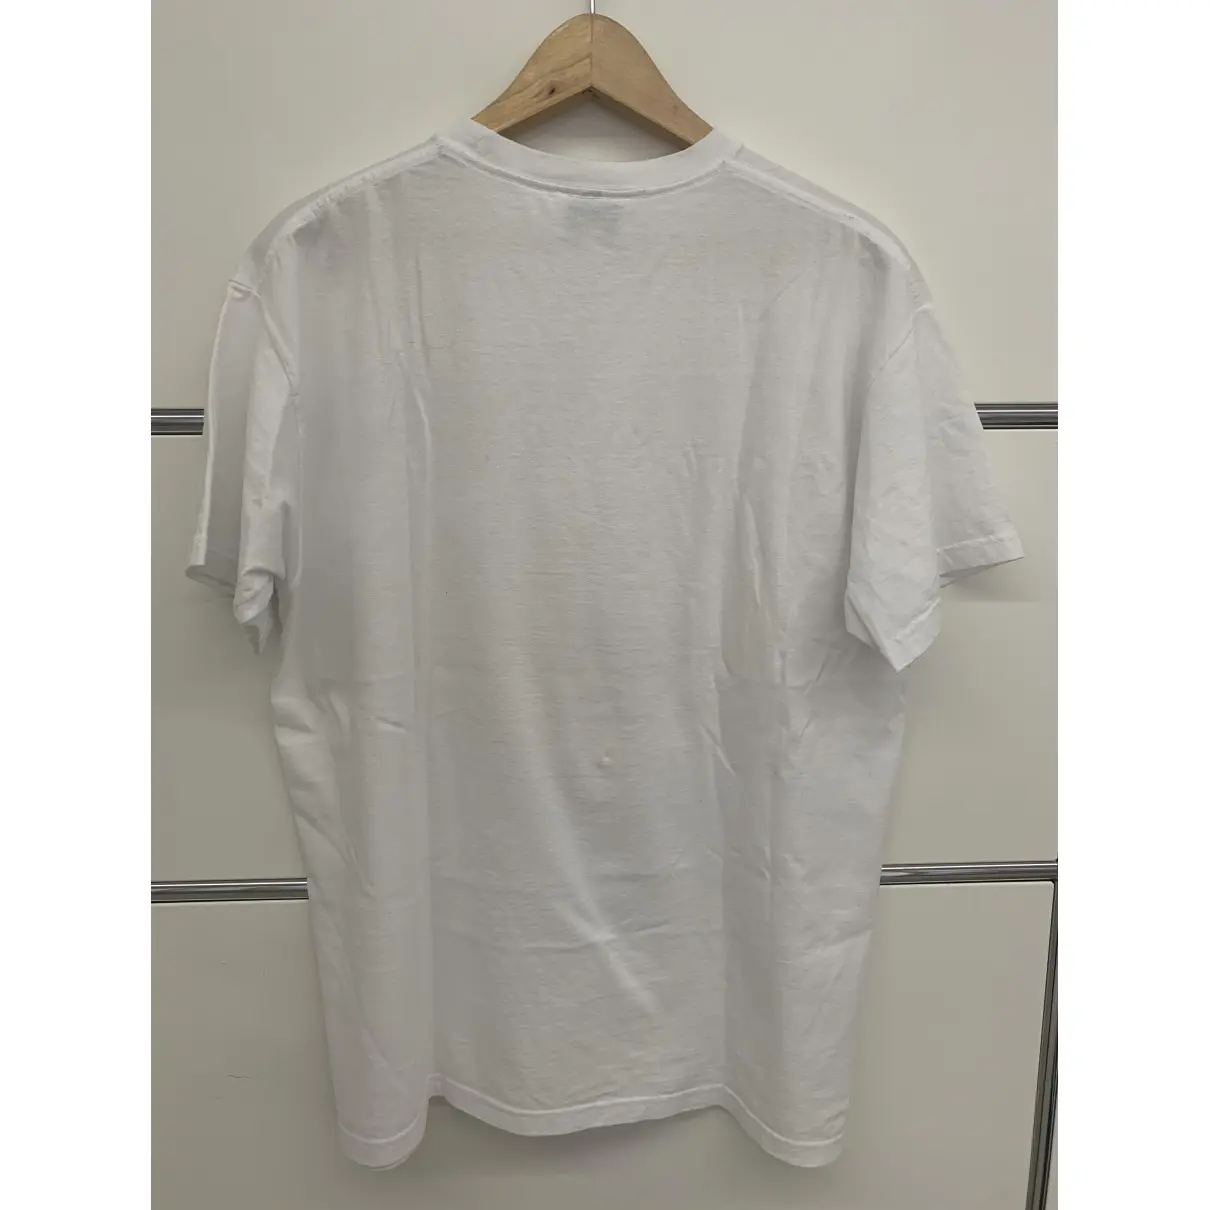 Buy Barrie White Cotton Top online